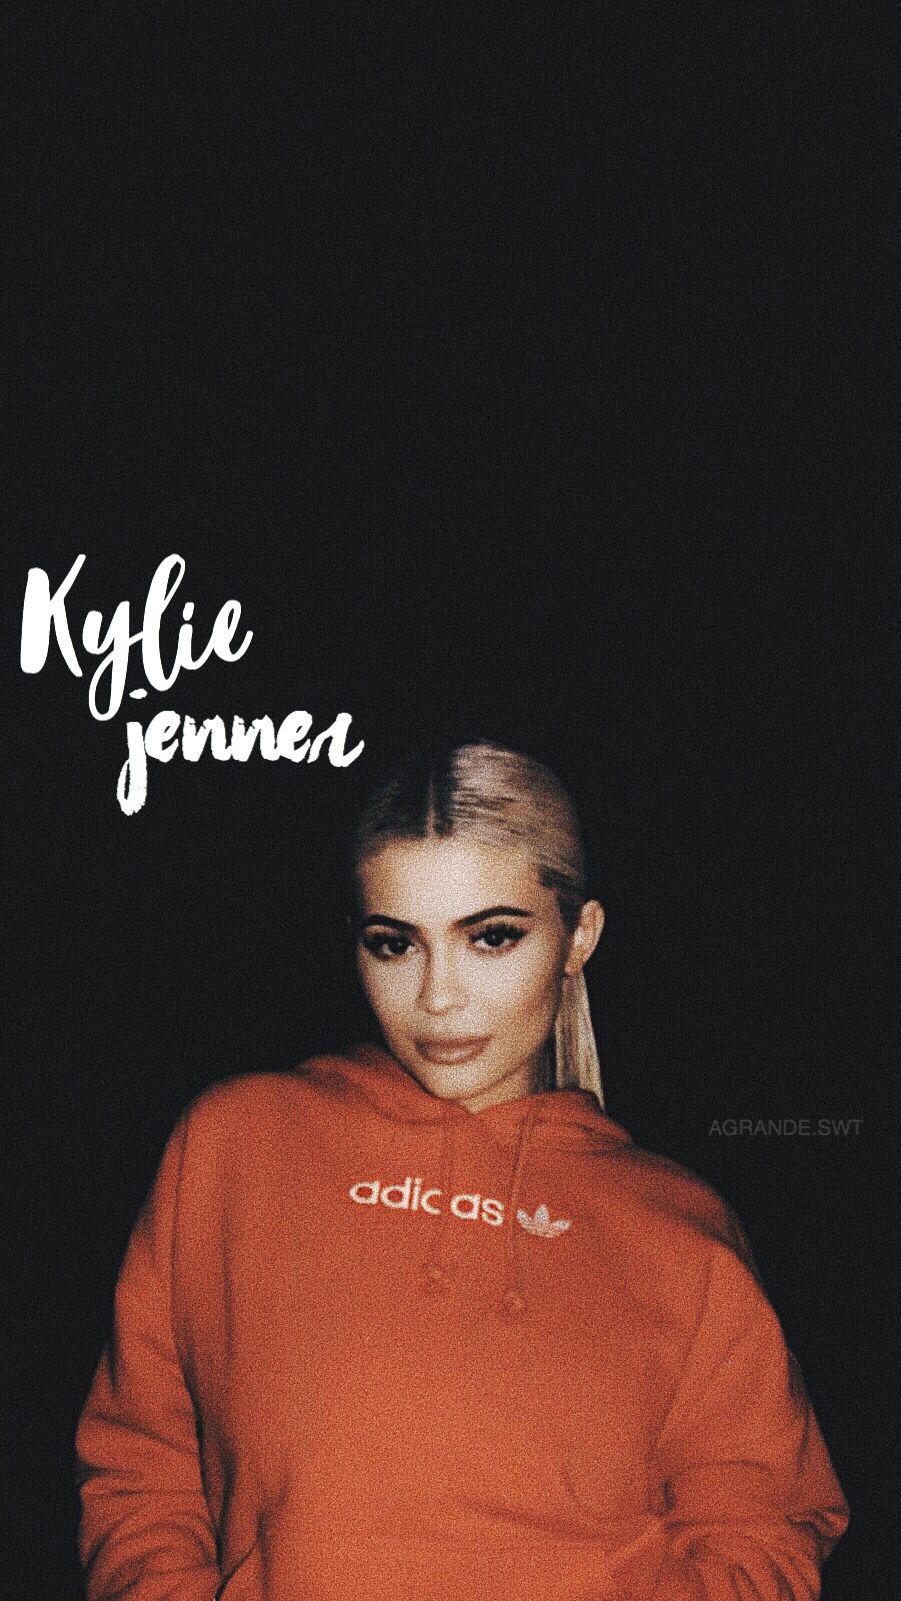 Kylie Jenner Aesthetic Wallpapers - Top Free Kylie Jenner Aesthetic ...